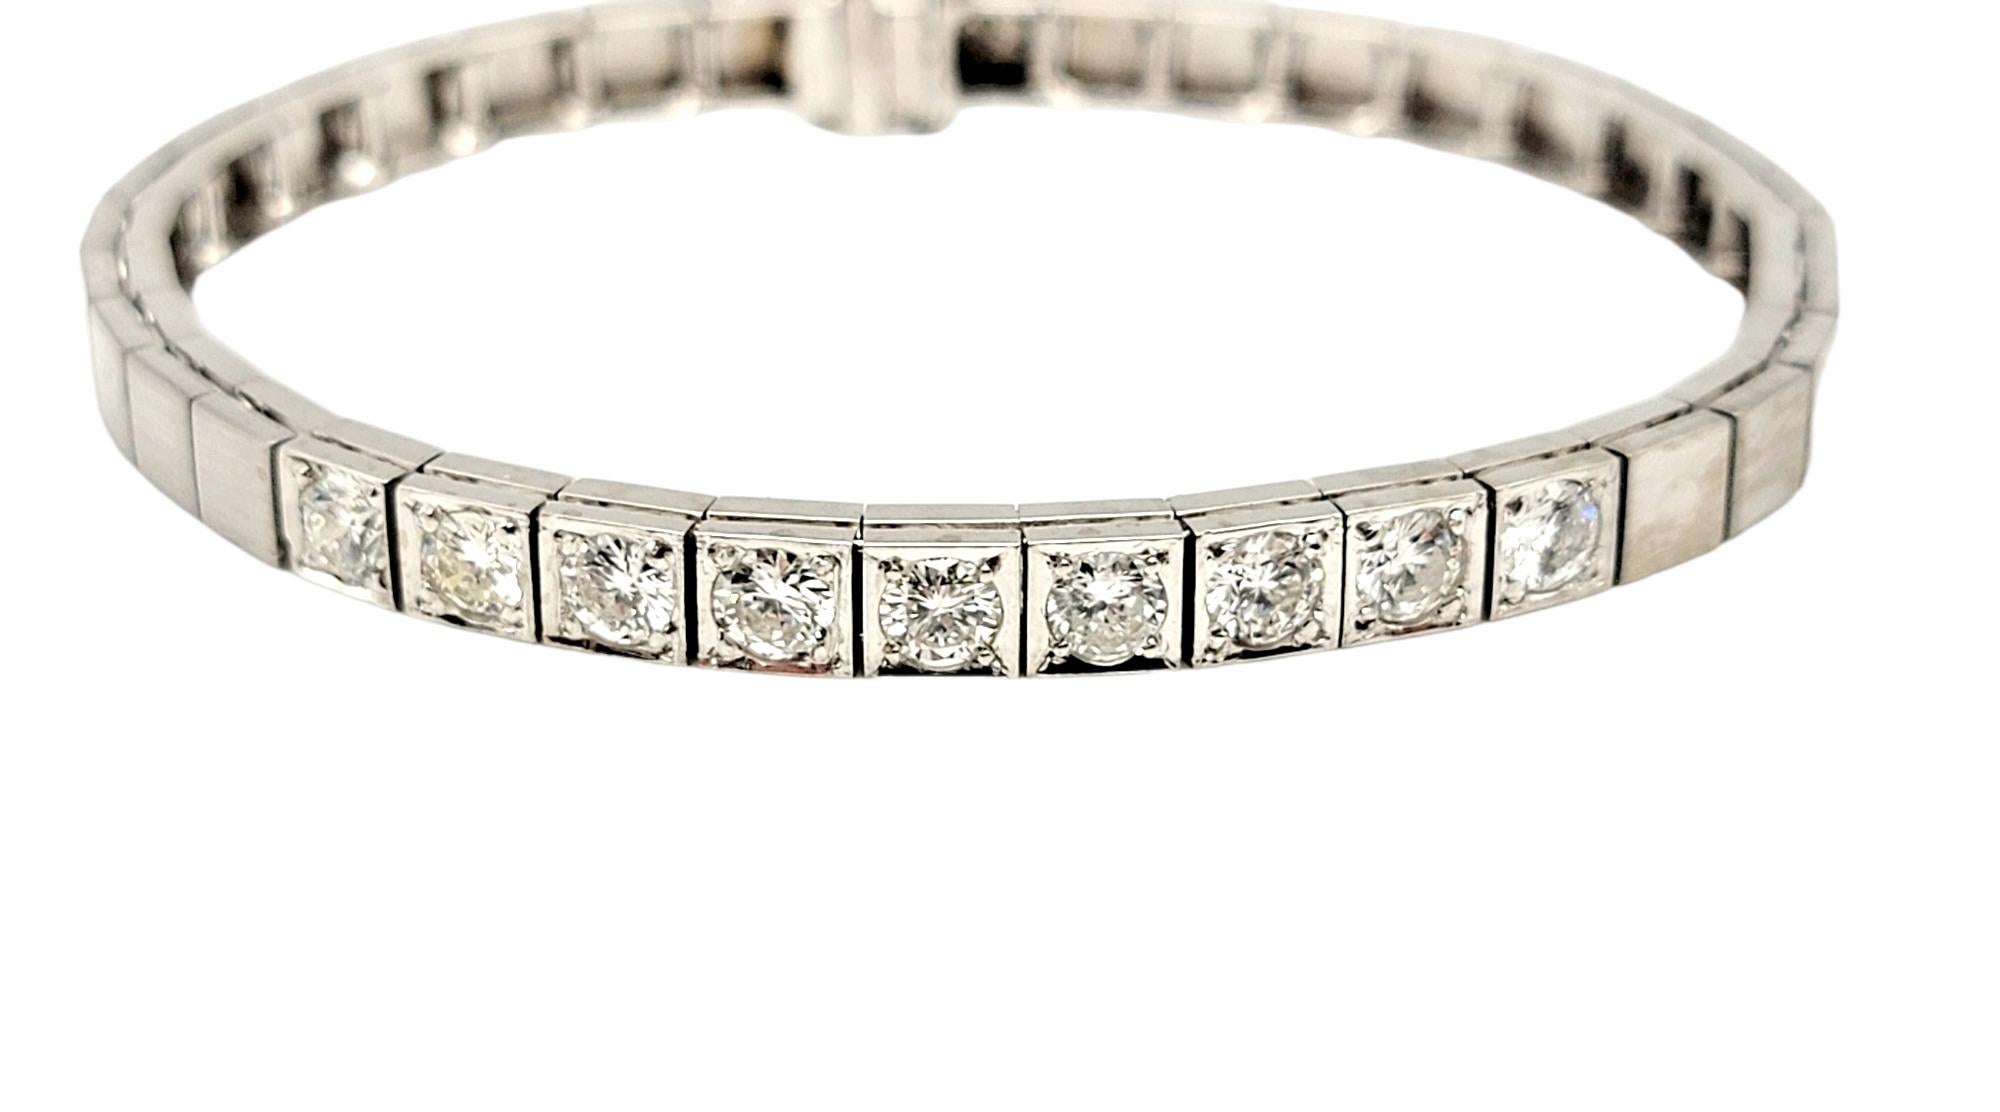 Sleek and stunning modern diamond link bracelet with a brushed white gold finish. Simple yet elegant piece can be dressed up or down and worn with just about everything.

Metal: 14 Karat White Gold
Natural Diamonds: 1.75 carat total weight
Diamond